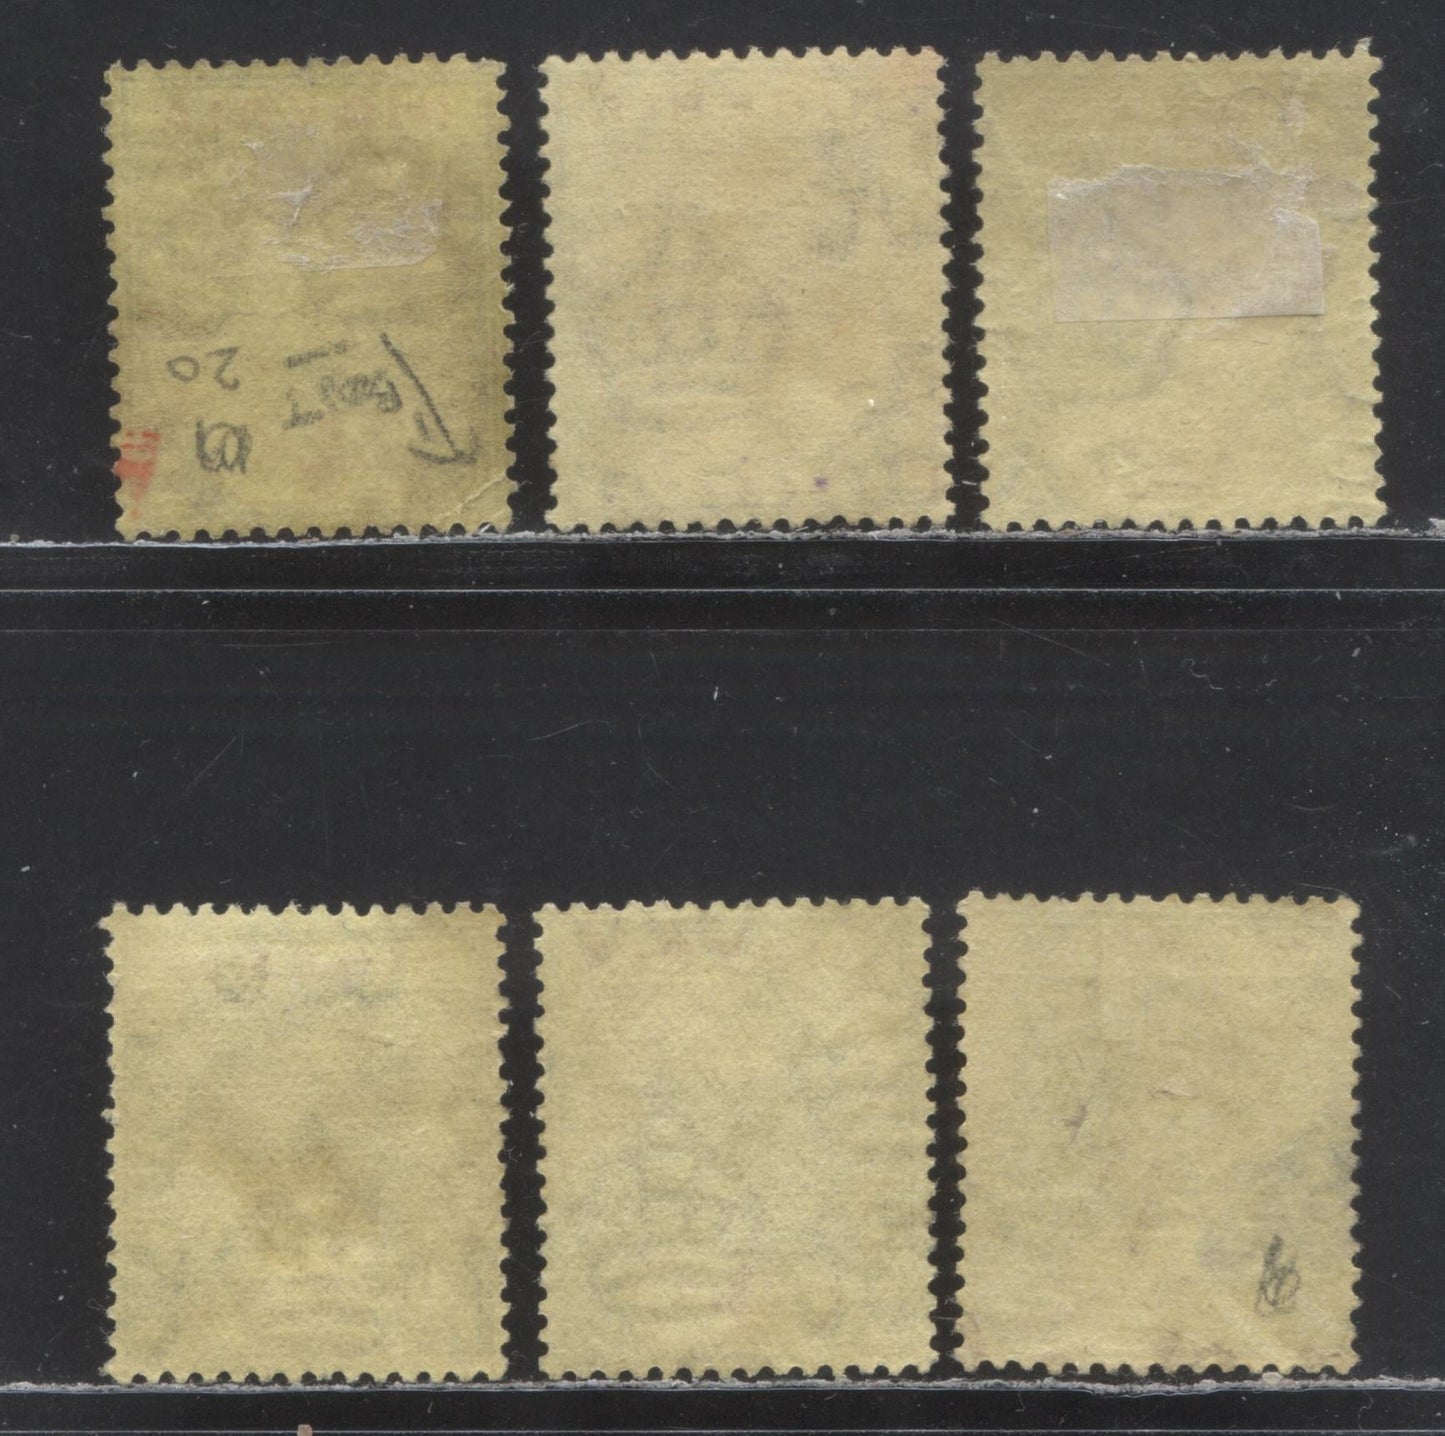 Nigeria SC# 27a (SG# 24a) 4d 1921 - 1933 King George V Imperium Key Plate Issue, Script CA Watermark, Die 1  6 Different Printings On Pale Yellow Backed Paper, 6 F/VF Used Singles, 2022 Scott Classic Cat. $46.50 USD